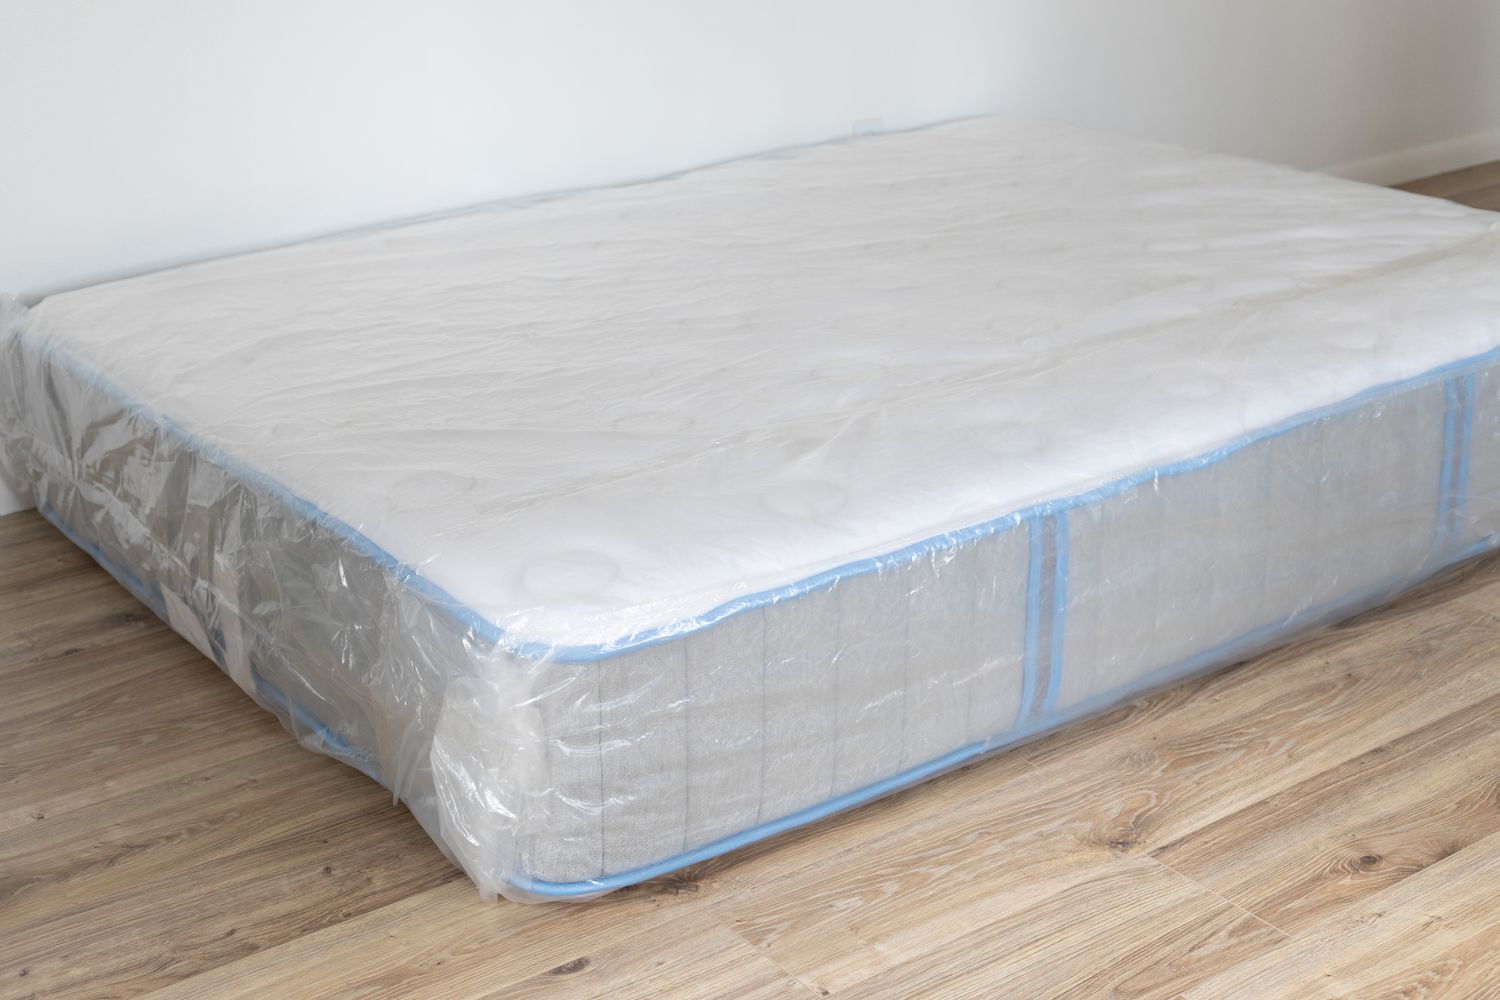 How Long Can A Mattress Be Stored On Its Side?